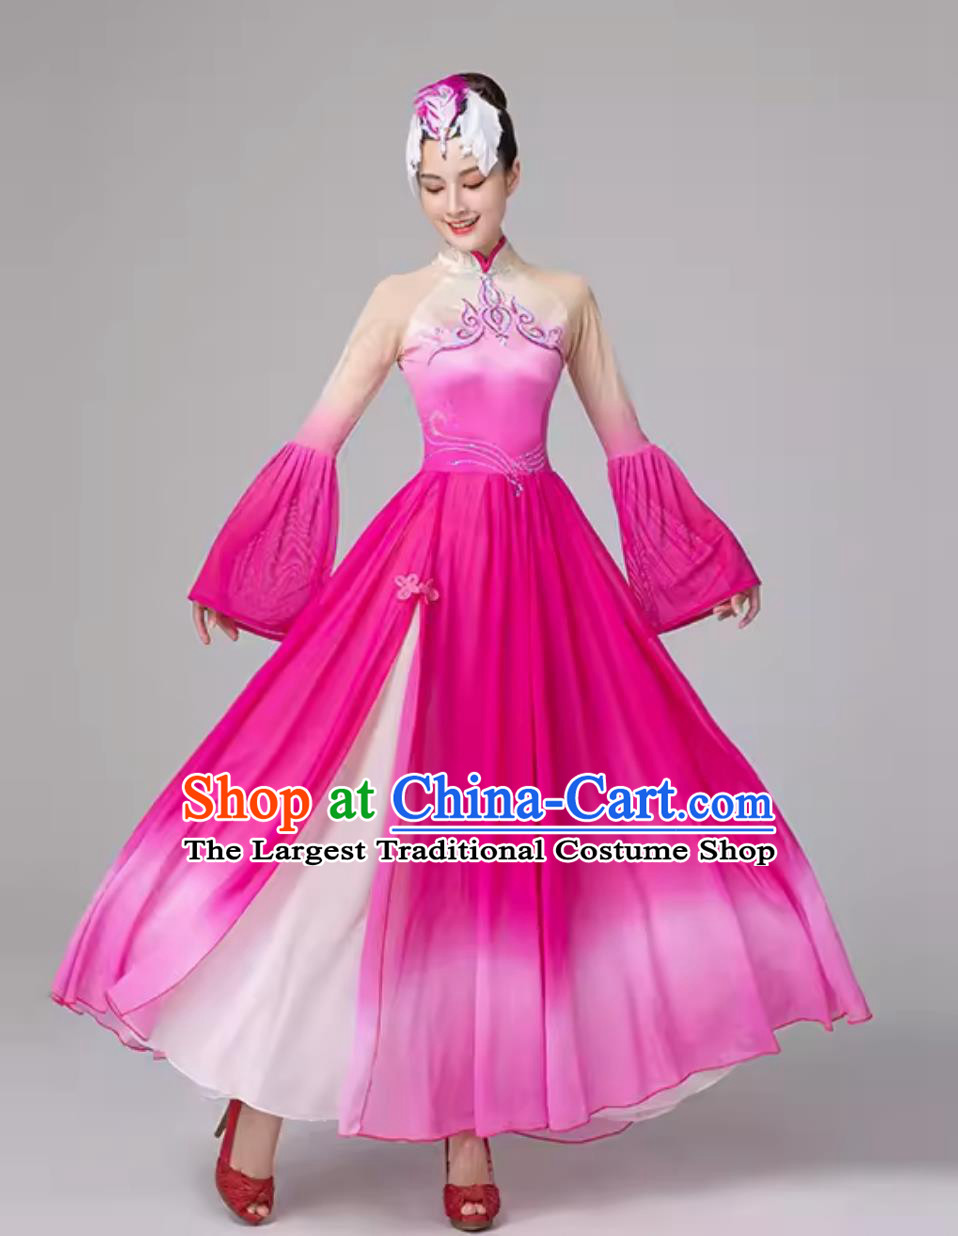 China Taoli Cup Dance Competition Costume Elegant Big Display Performance Clothing Fan Dance Chinese Classical Dance Pink Dress